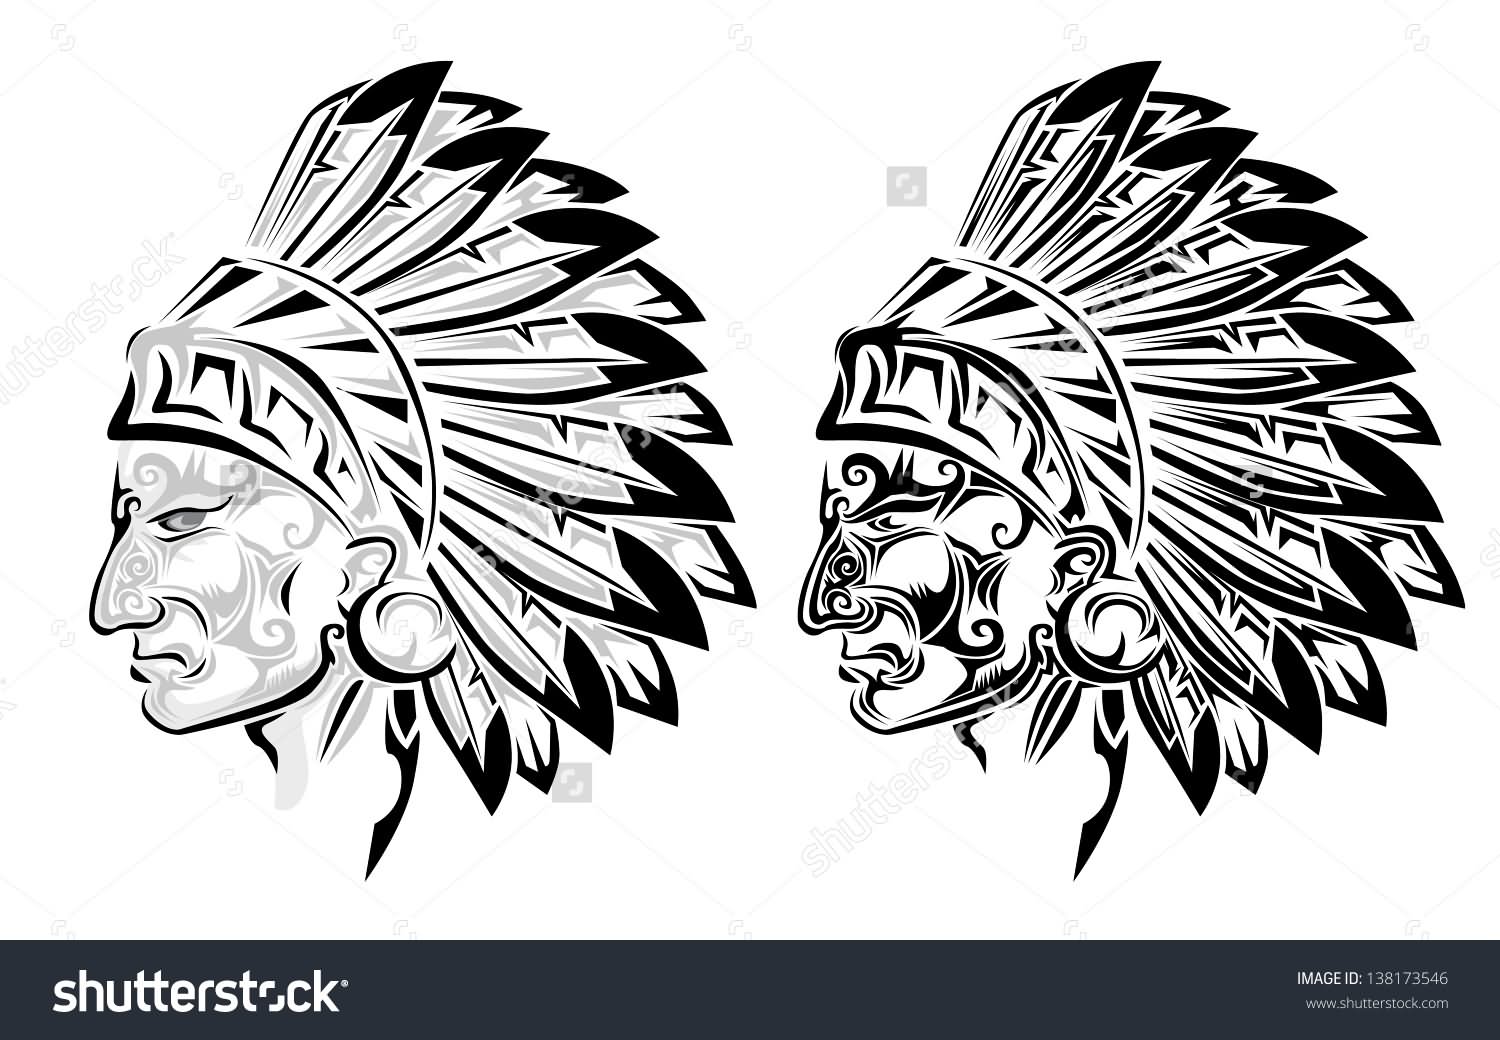 Amazing Two Indian Chief Face Tattoo Design